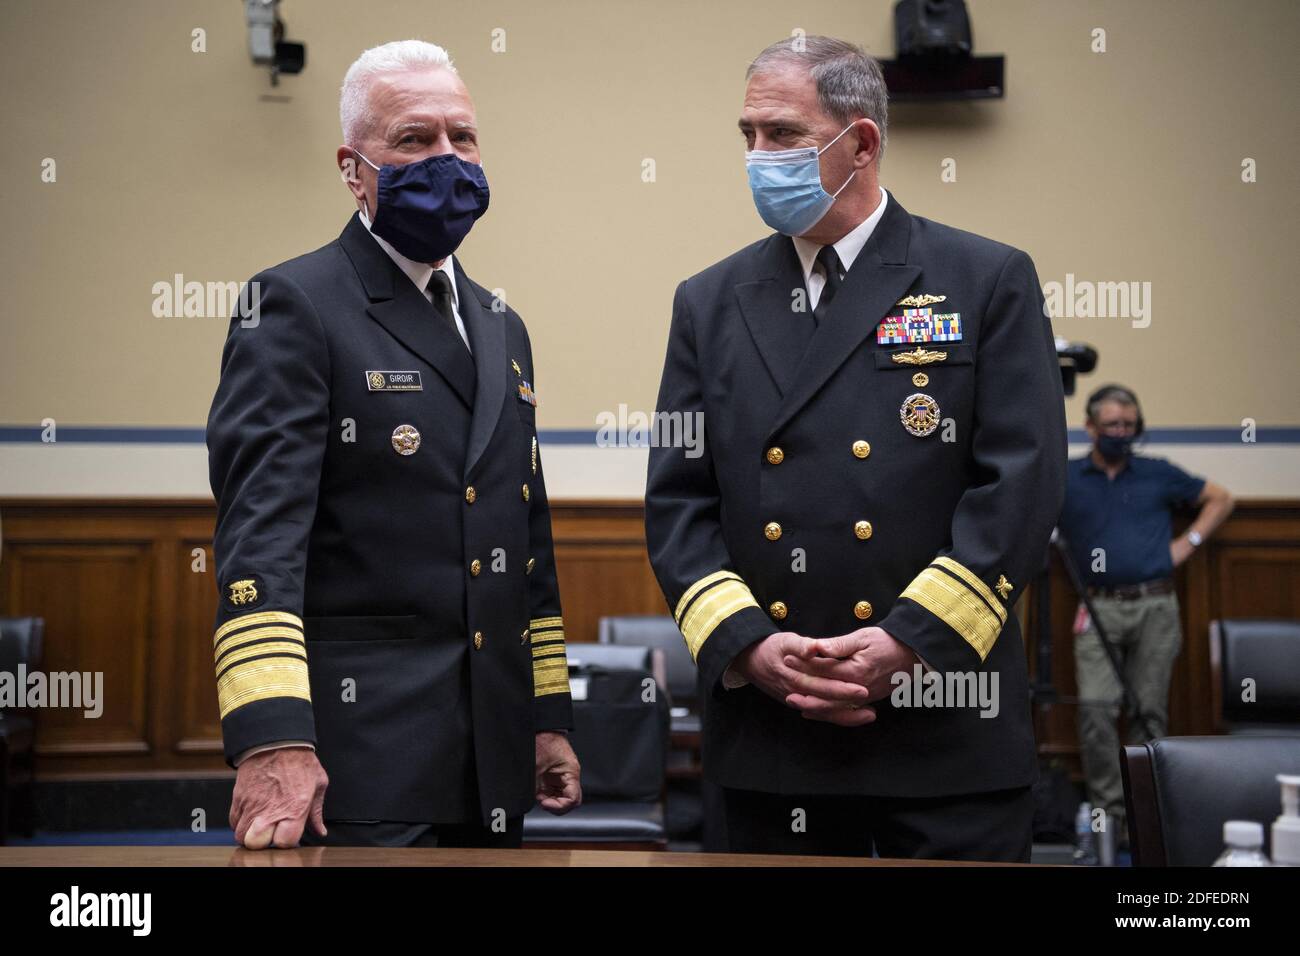 UNITED STATES - JULY 2: Admiral Brett P. Giroir, M.D., Assistant Secretary for Health, left, talks with Rear Adm. John Polowczyk, leader of the Supply Chain Stabilization Task Force and vice director of logistics of the Joint Chiefs of Staff, before the start of a House Oversight and Reform Committee hearing on âÂ€ÂœThe Administration's Efforts to Procure, Stockpile, and Distribute Critical SuppliesâÂ€Â in the Capitol in Washington on Thursday, July 2, 2020. Photo by Caroline Brehman/Pool/ABACAPRESS.COM Stock Photo